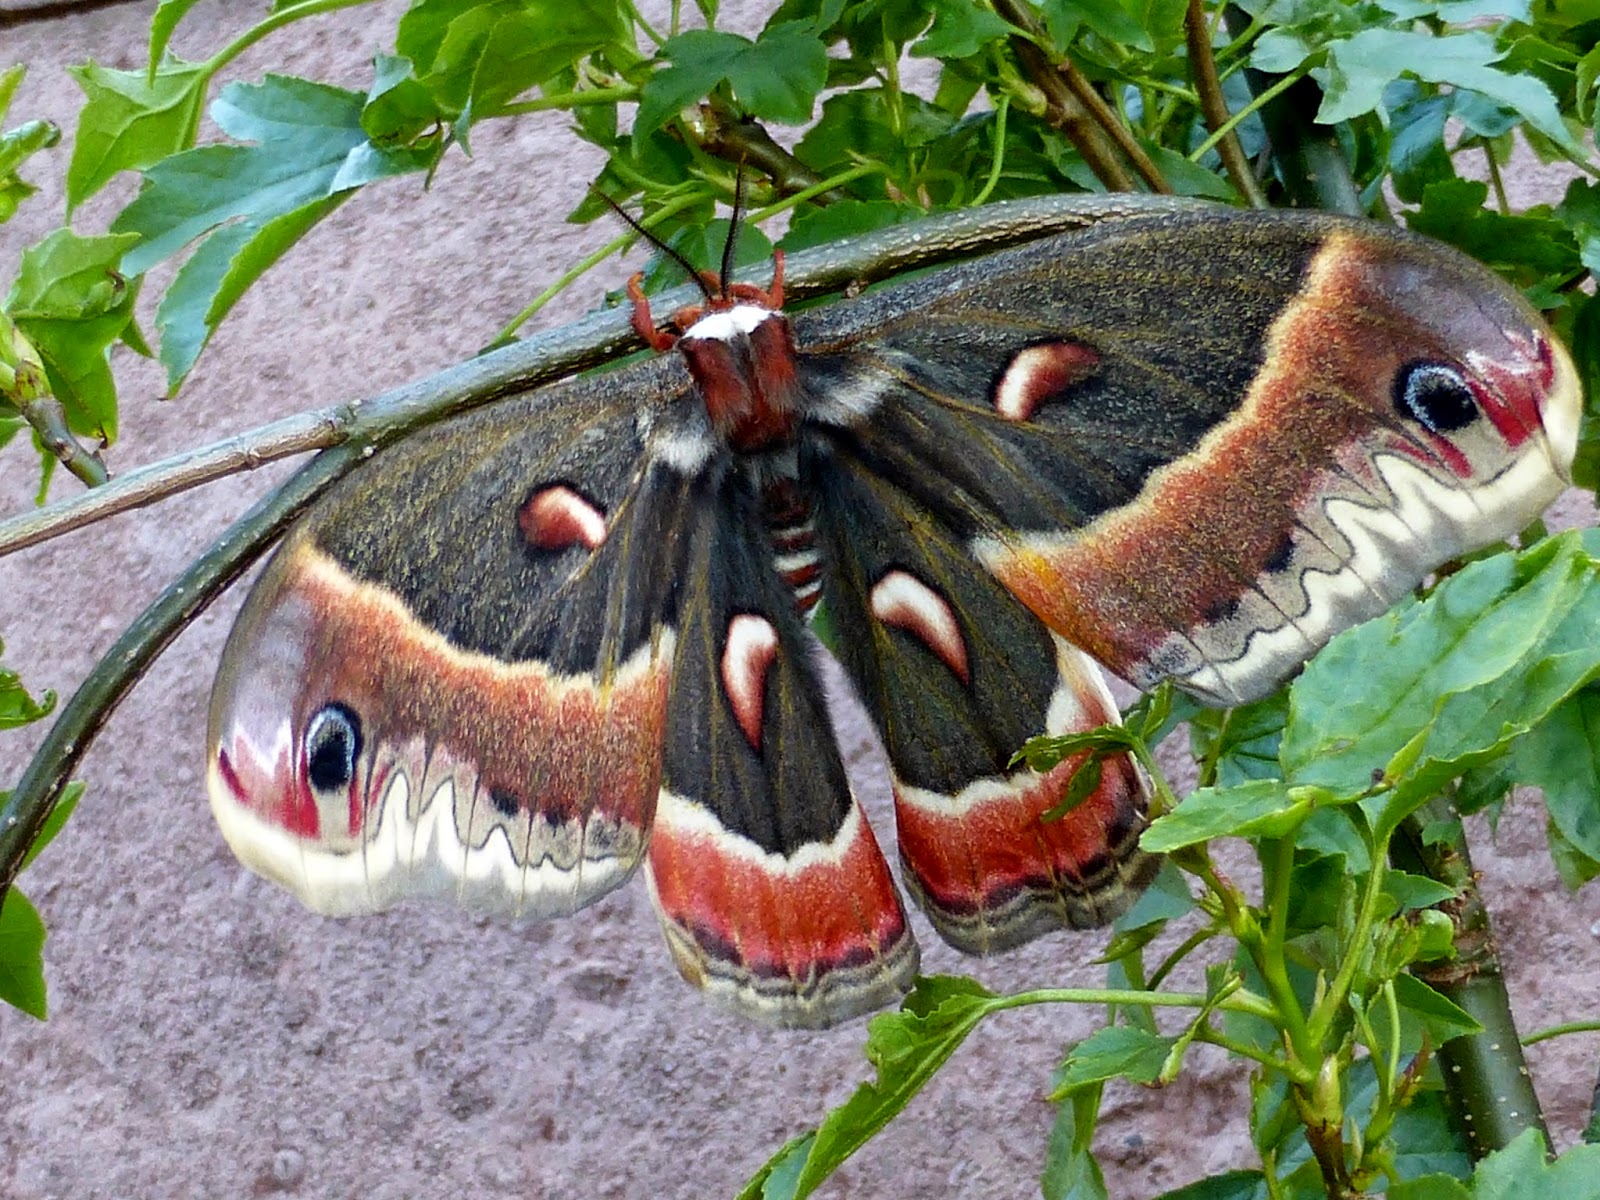 Silkmoths and more: Silkmoth of the week: Hyalophora cecropia